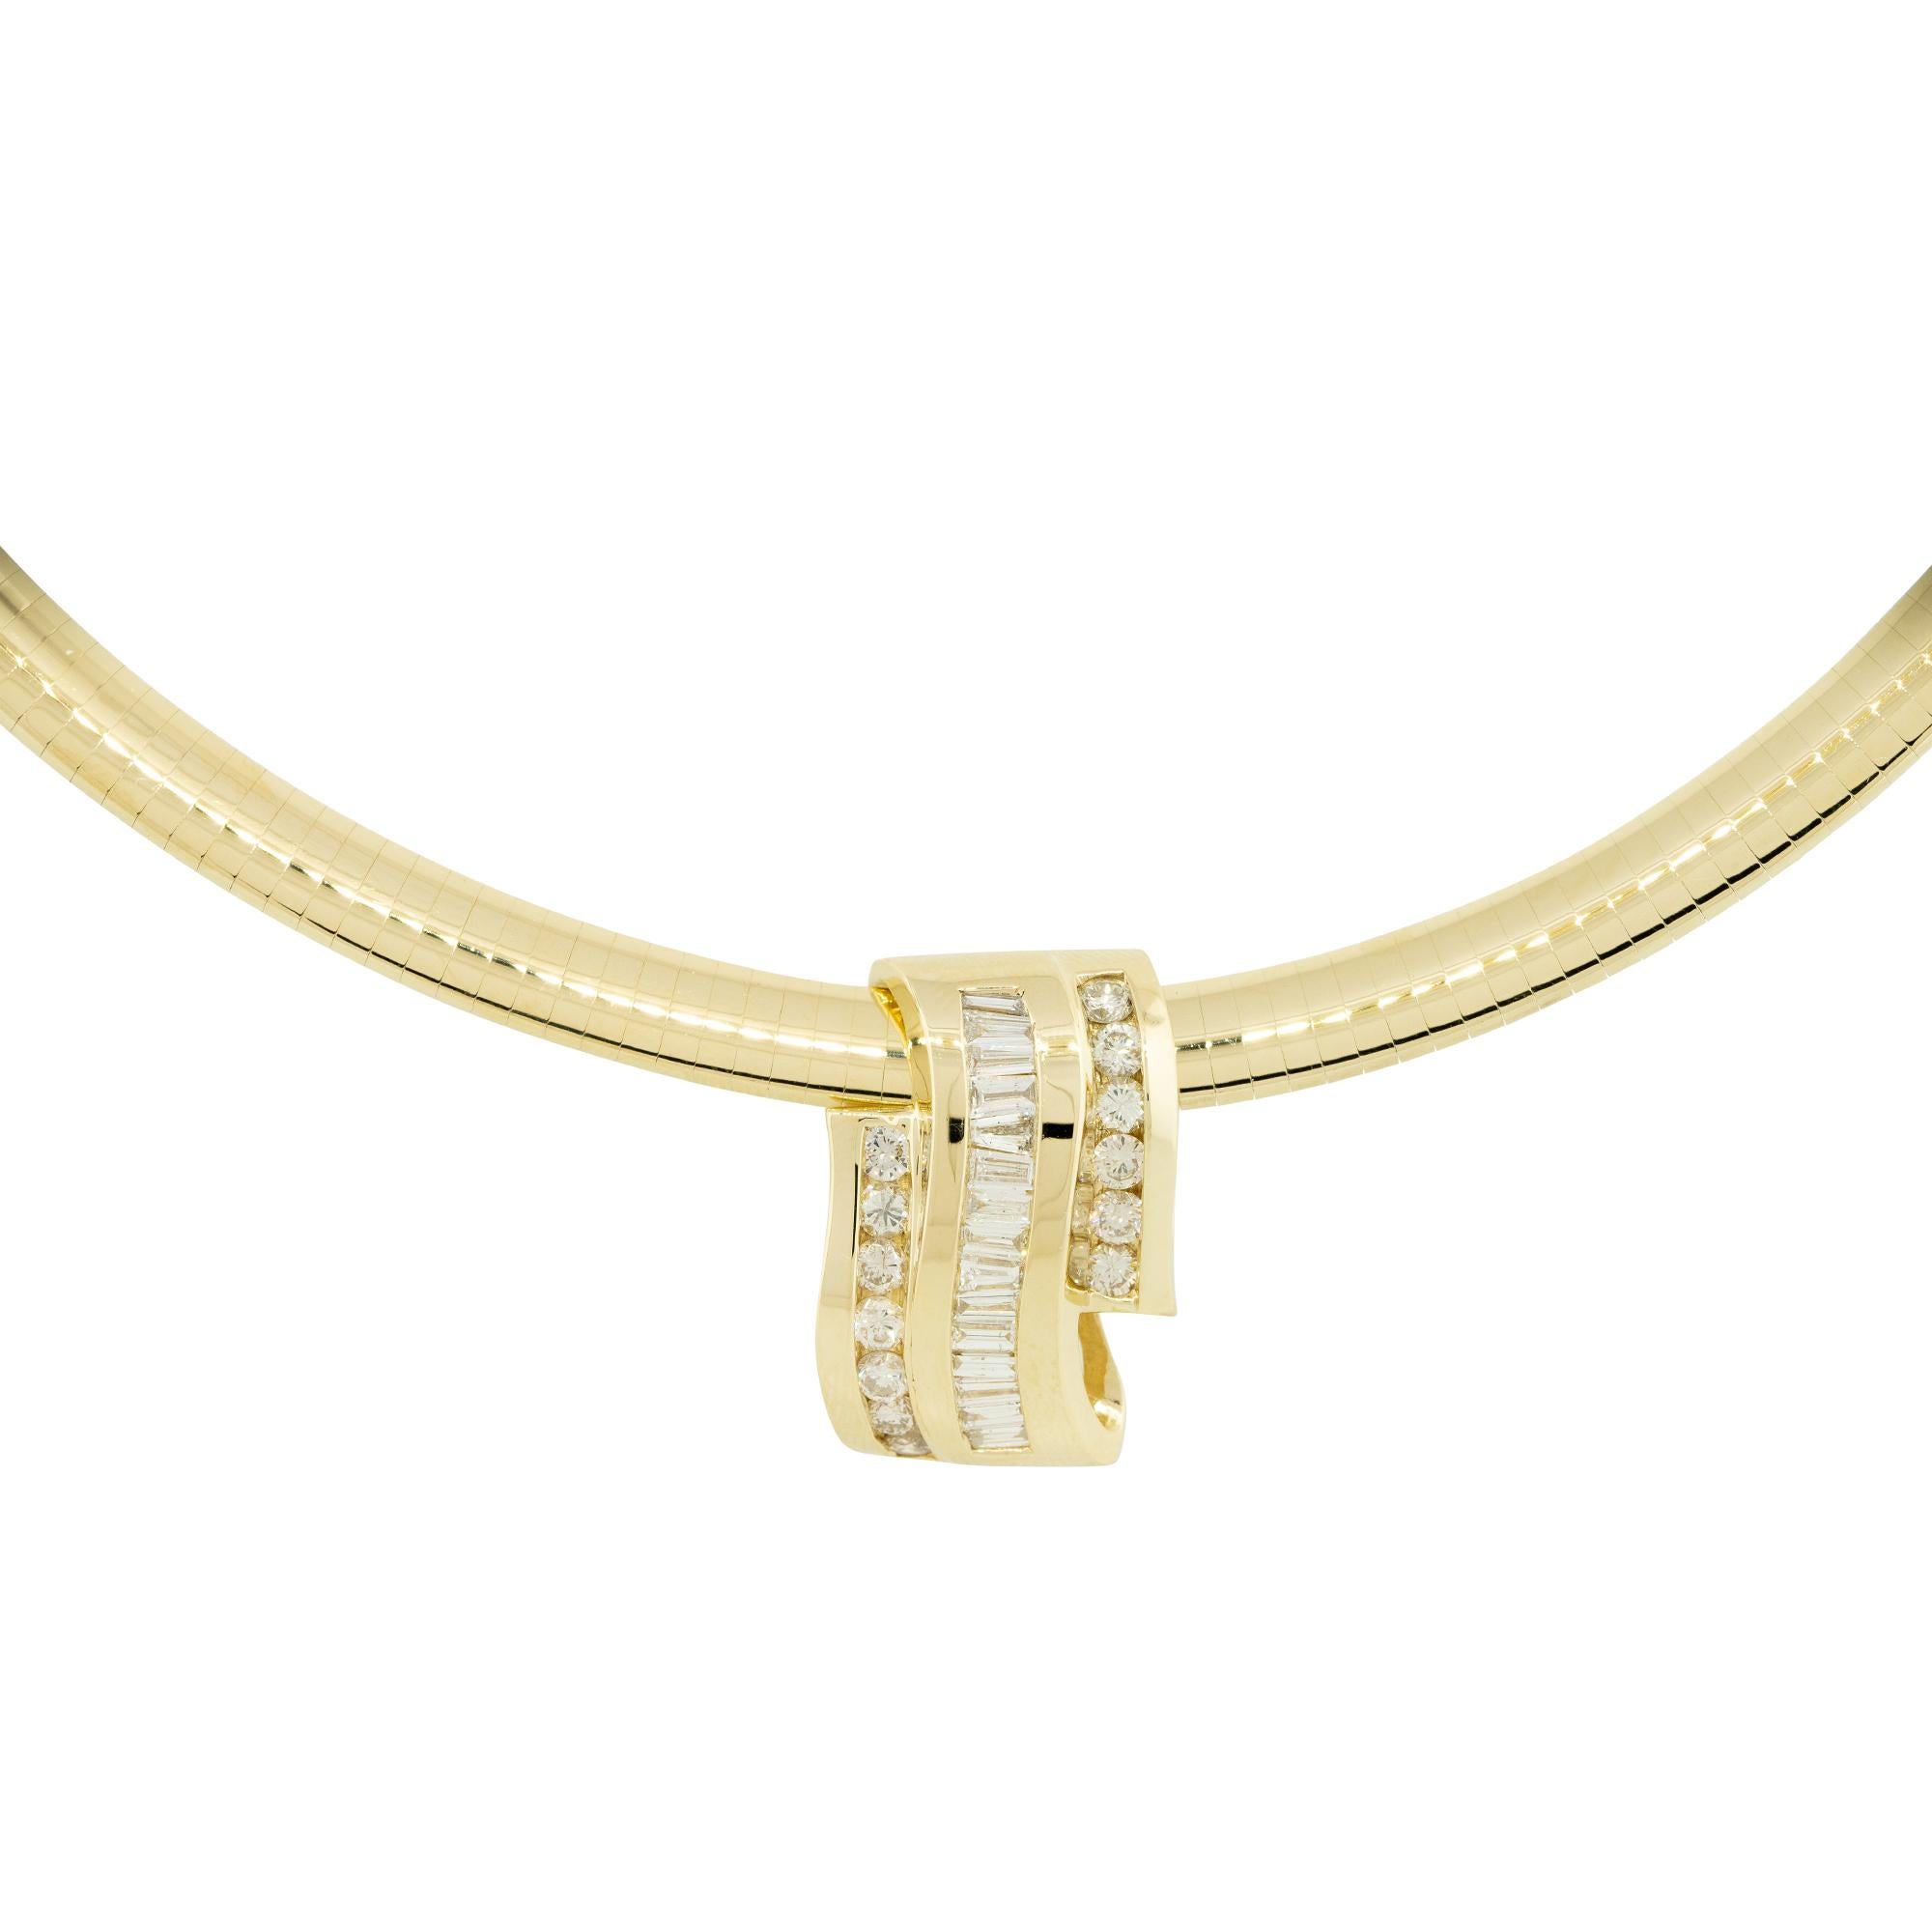 14k Yellow Gold 1.41ctw Sliding Baguette and Round Brilliant Diamond Pendant on Omega Necklace
Material: Both Pendant and Necklace: 14k Yellow Gold
Diamond Details: Approximately 1.41ctw of tapered Baguette and Round Brilliant Diamonds
Pendant